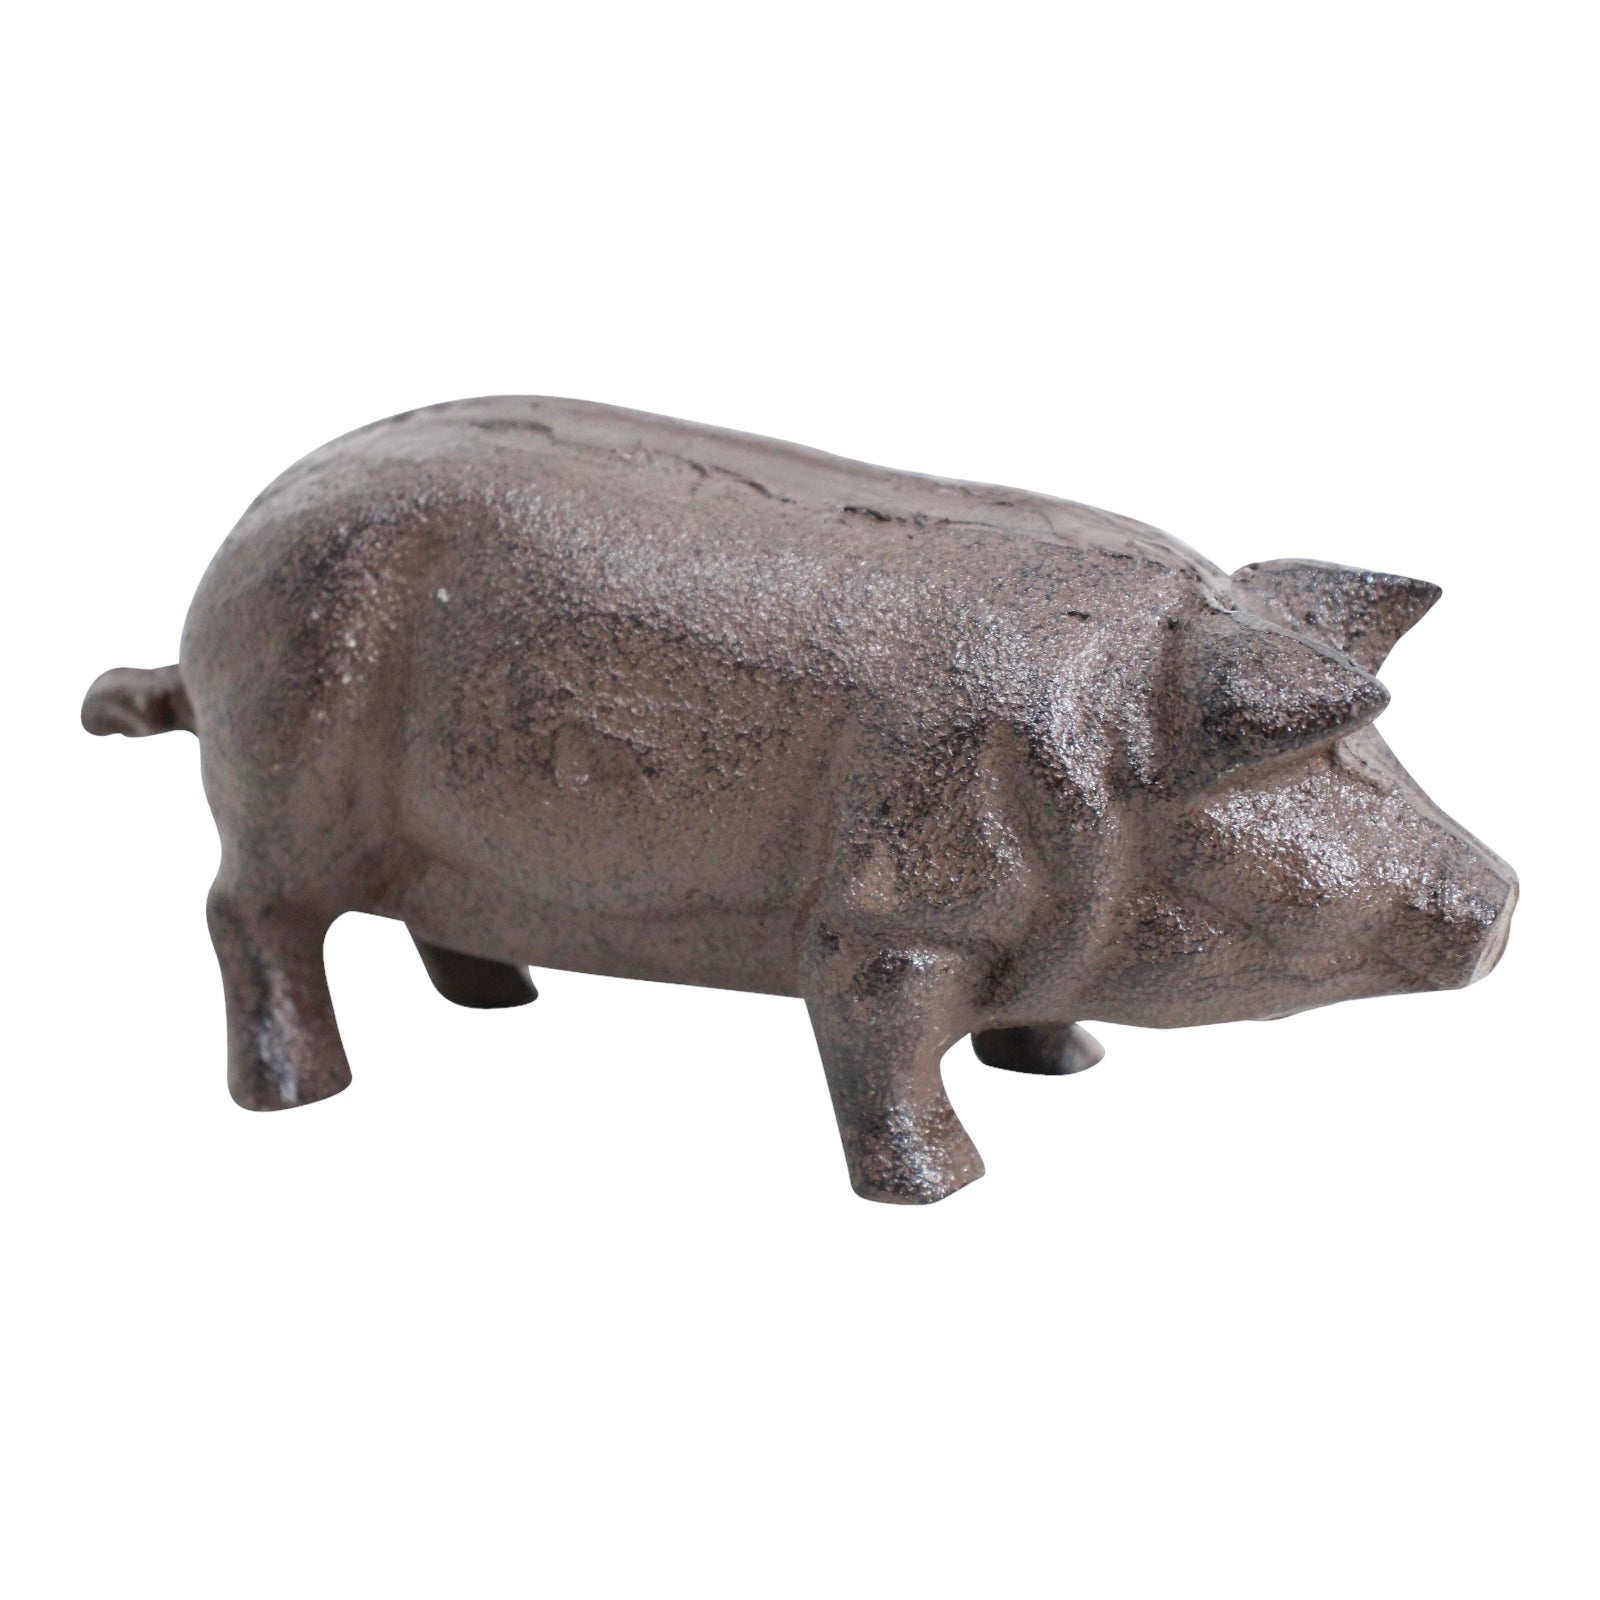 Pig Cast Iron Country Ornament - The Renmy Store Homewares & Gifts 